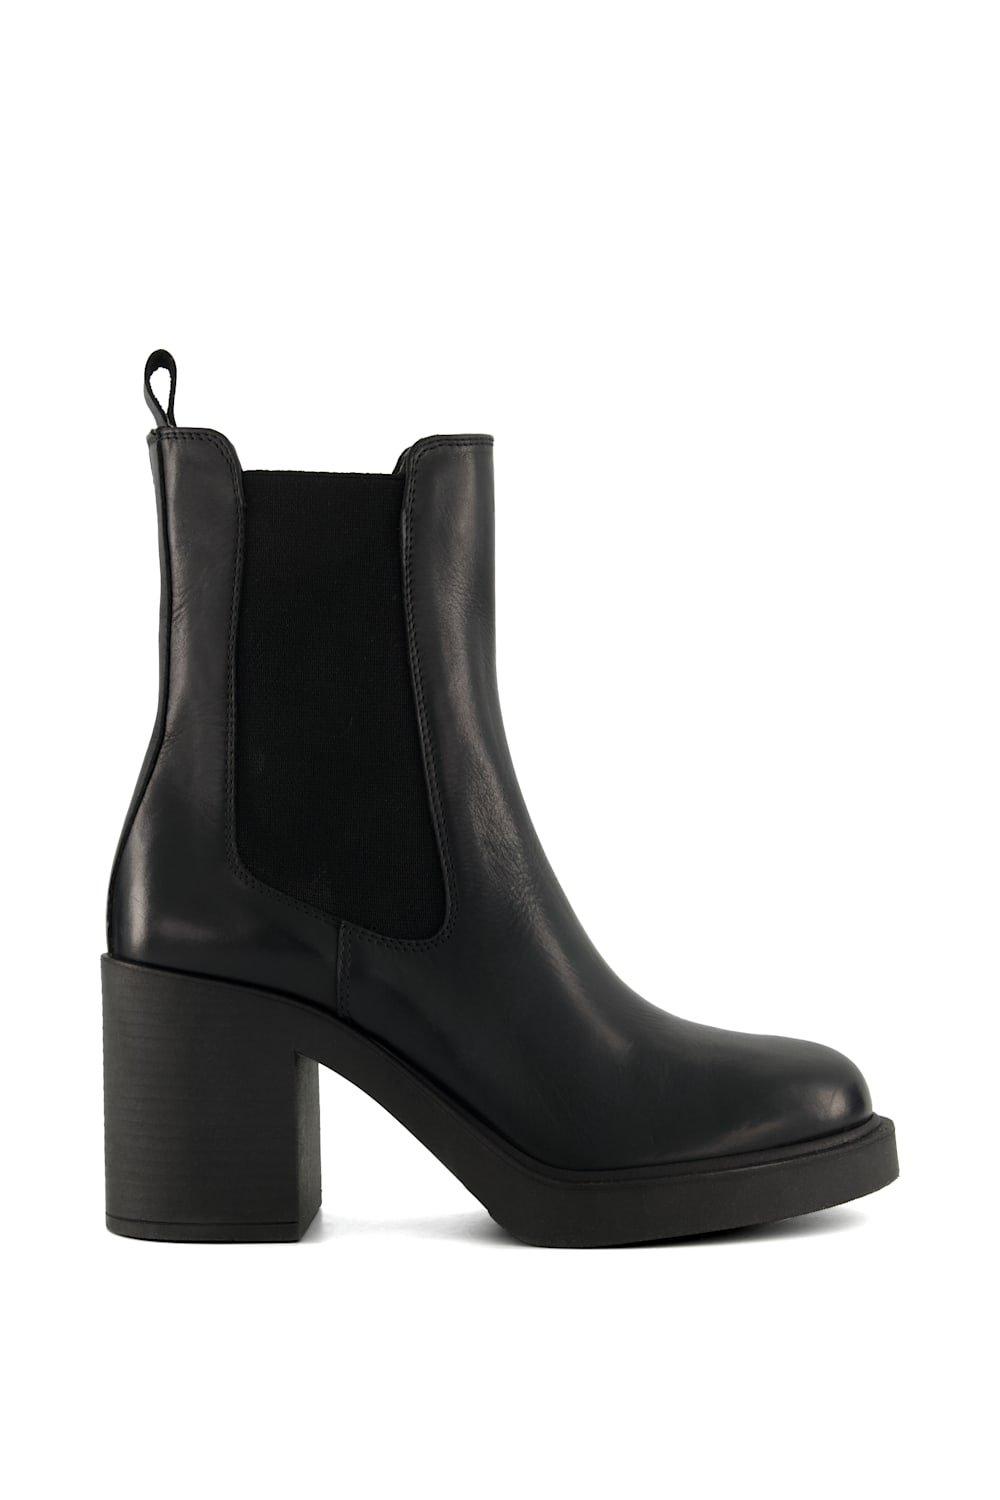 Boots | 'Pinaz' Leather Ankle Boots | Dune London